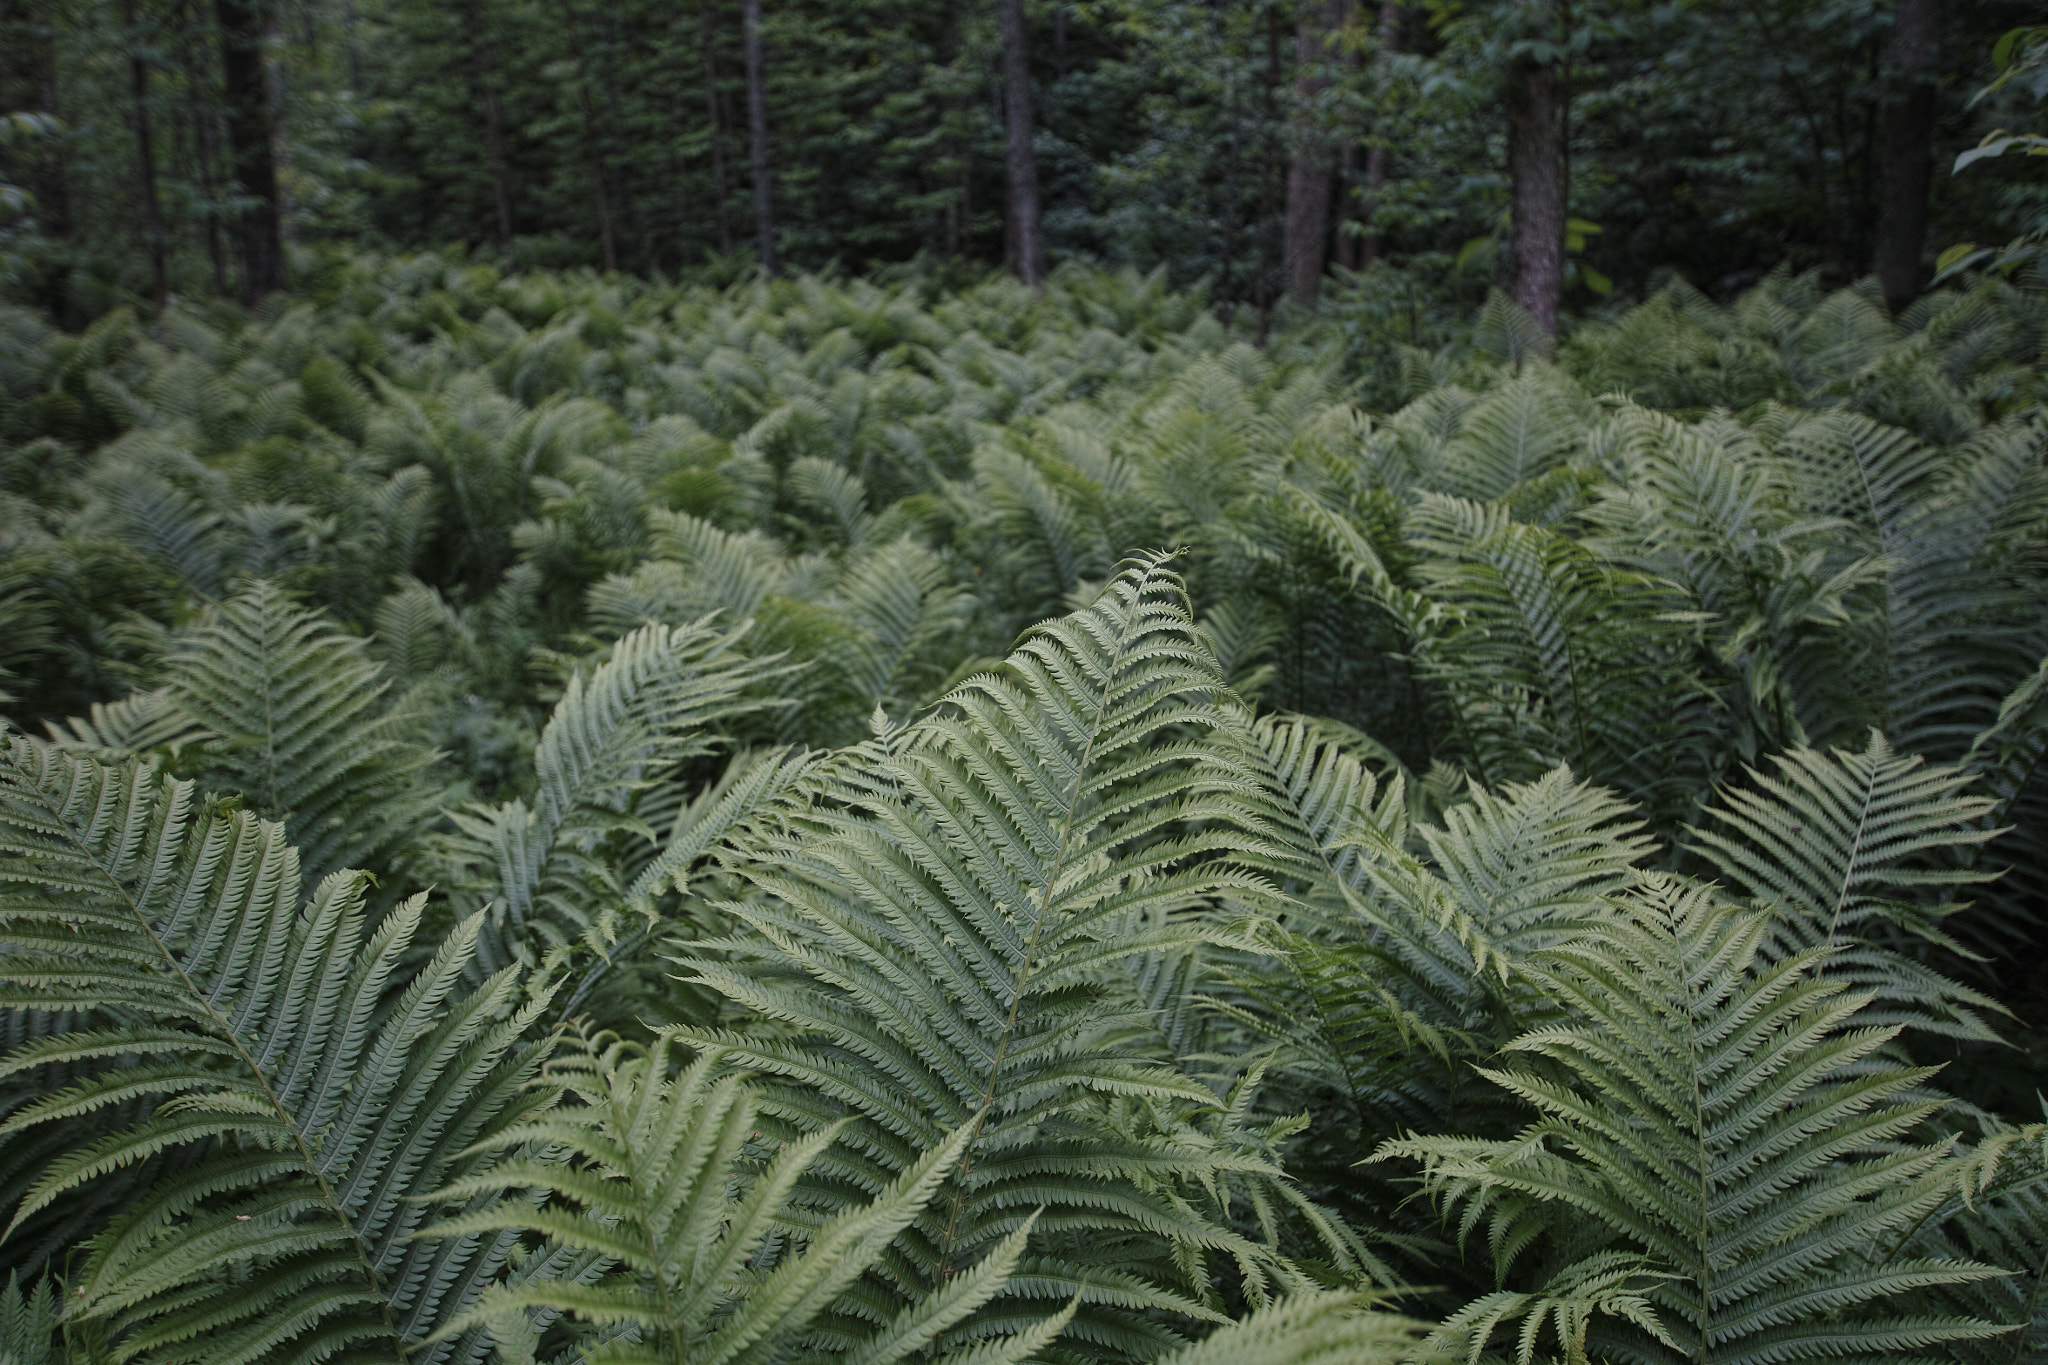 Sigma SD1 Merrill sample photo. Carpets of ferns photography